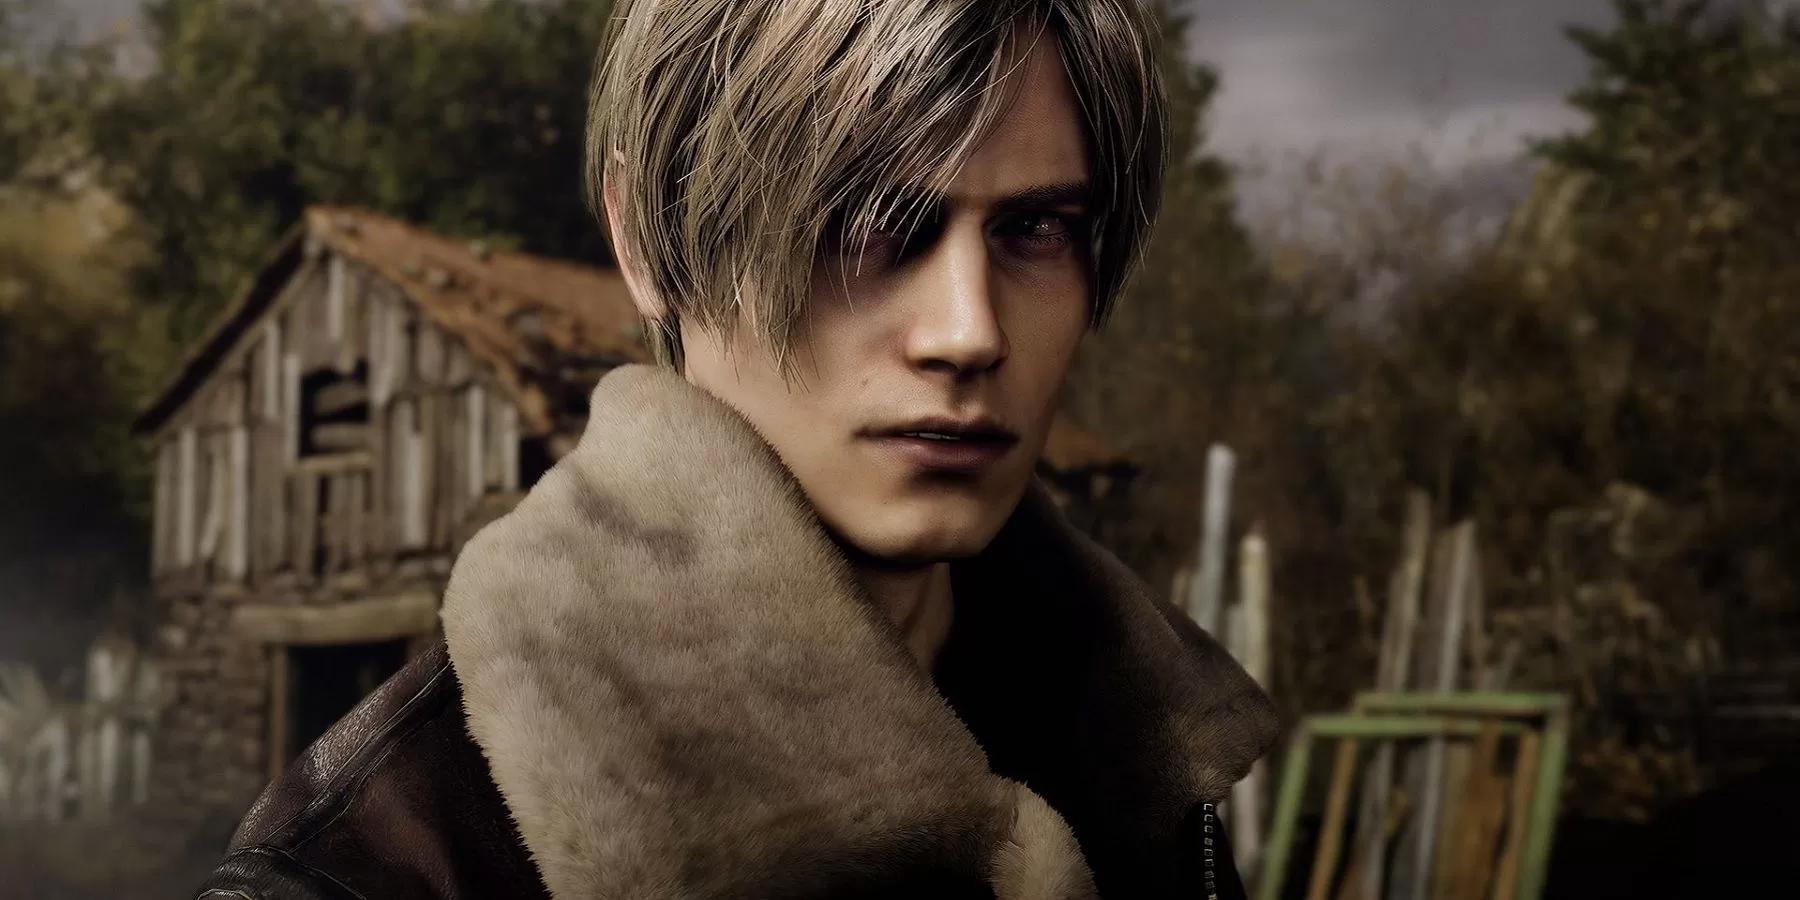  Resident Evil 4 Remake is ditching QTEs and I couldn't be more upset 